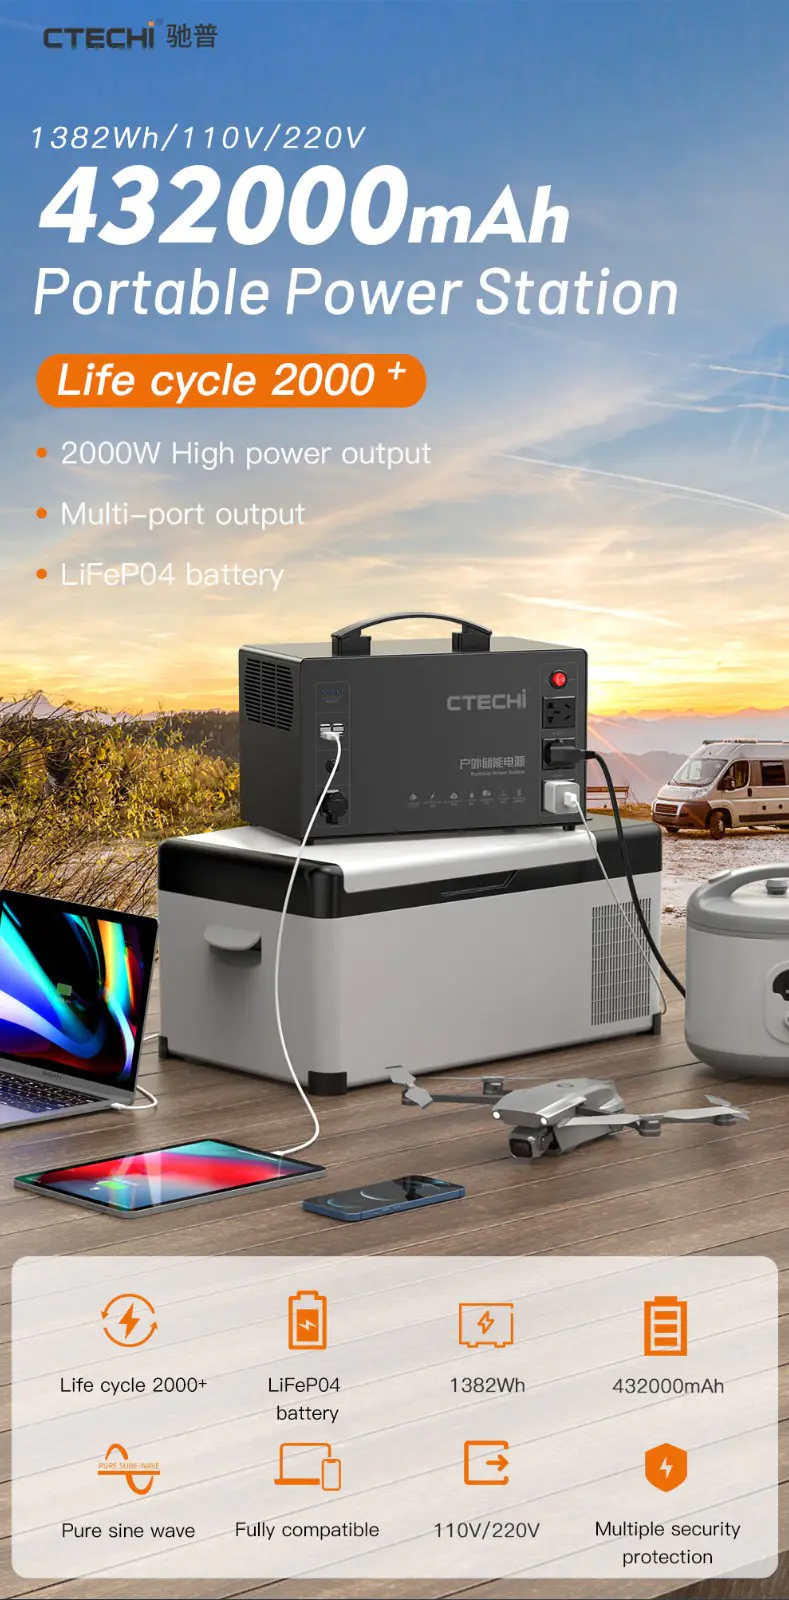 CTECHi mobile power station factory for household